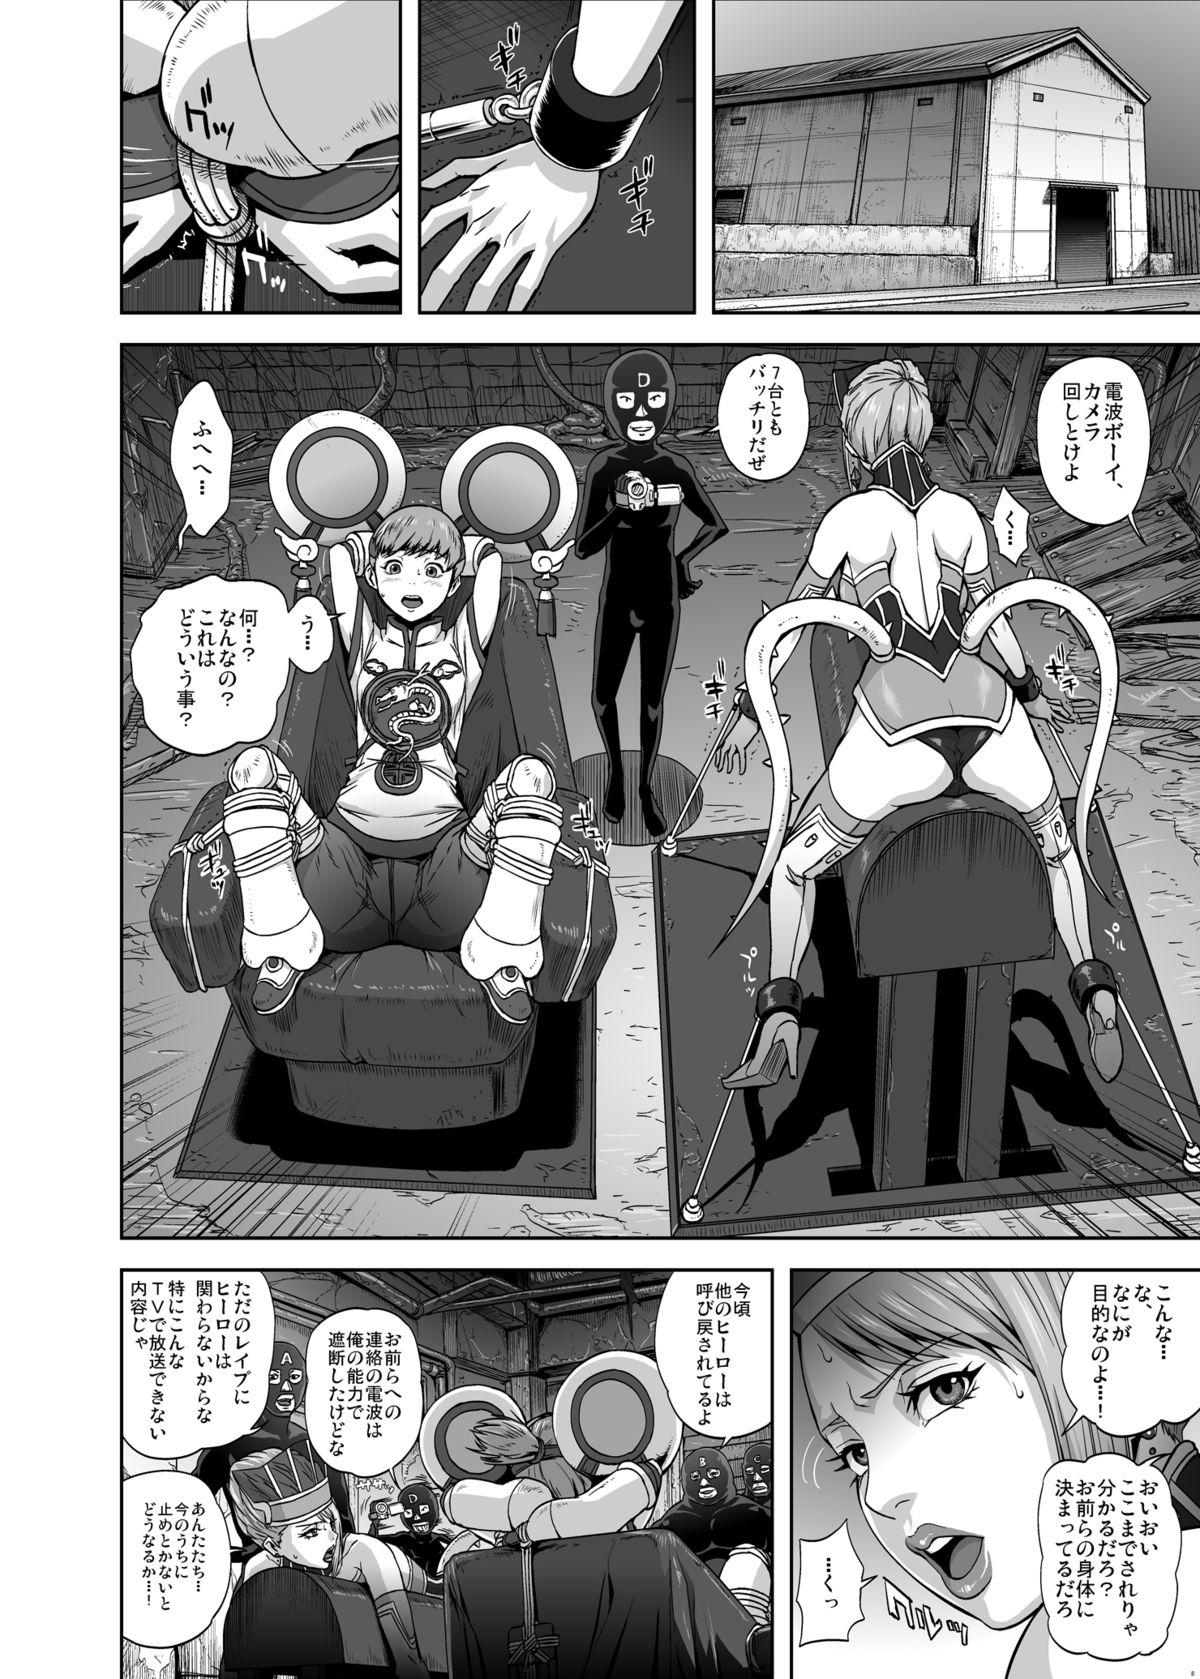 Porn Blow Jobs DRAGON & ROSE - Tiger and bunny Colombia - Page 7